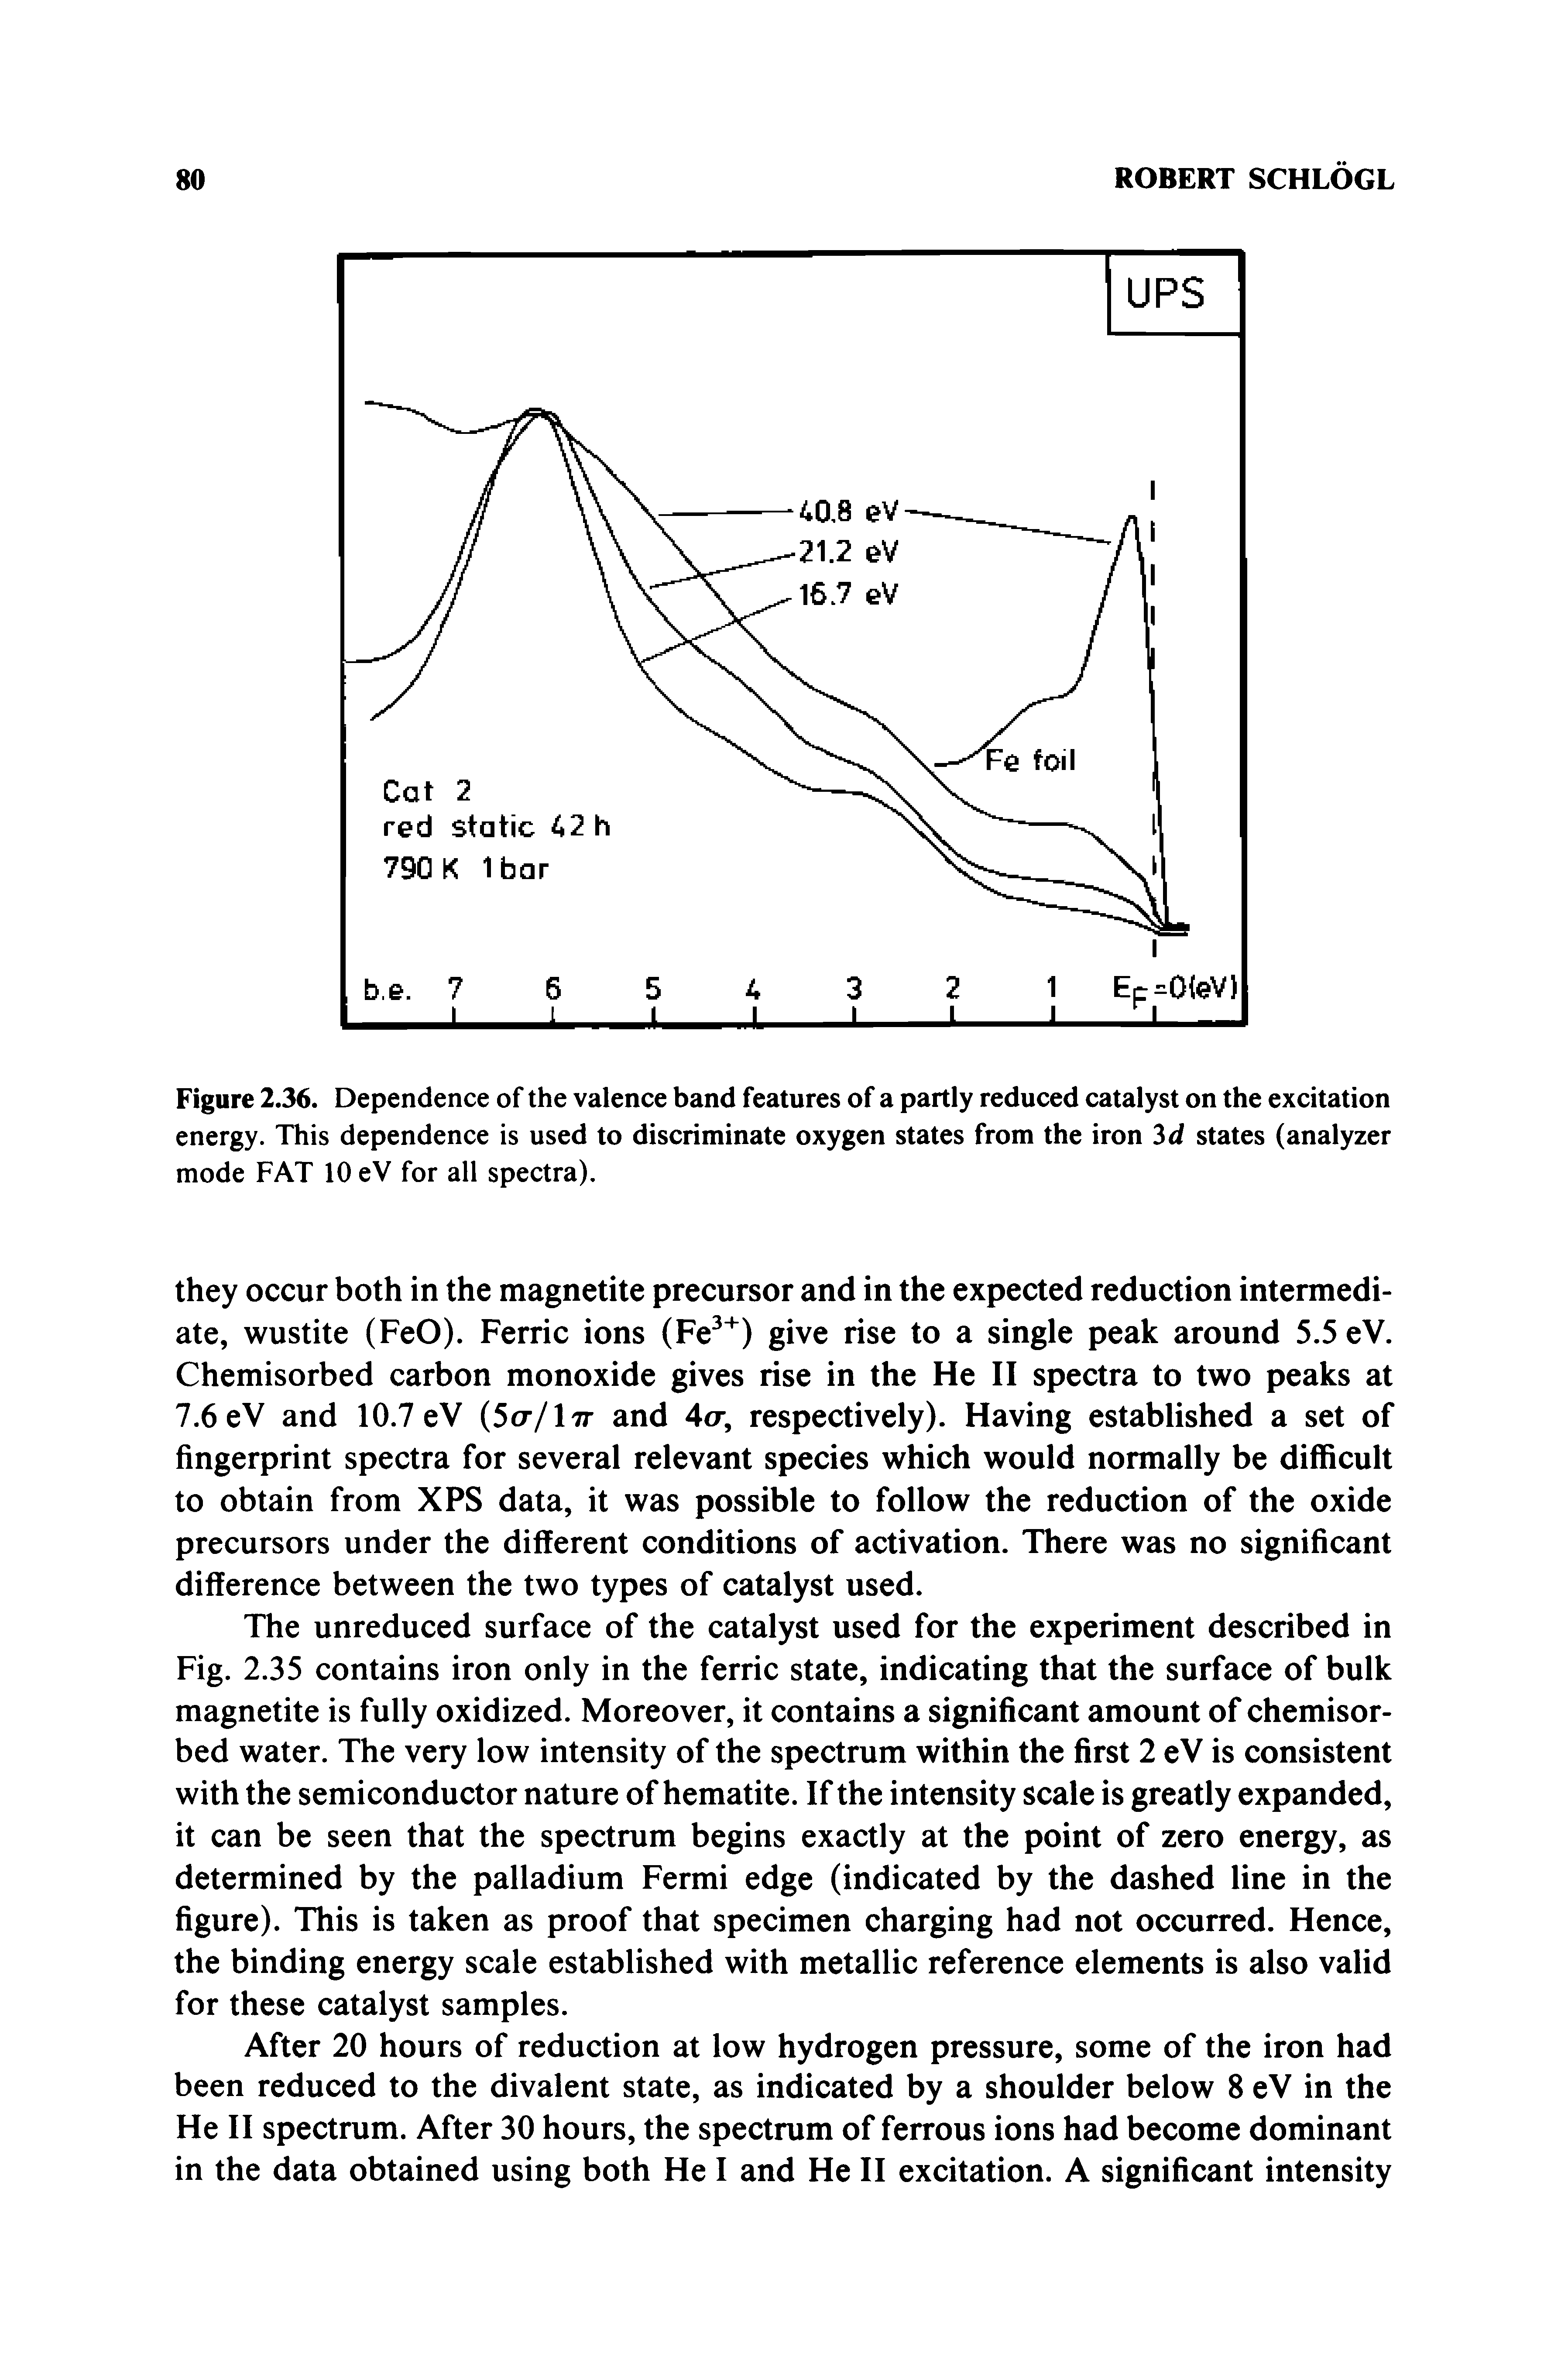 Figure 2.36. Dependence of the valence band features of a partly reduced catalyst on the excitation energy. This dependence is used to discriminate oxygen states from the iron 3d states (analyzer mode FAT 10 eV for all spectra).